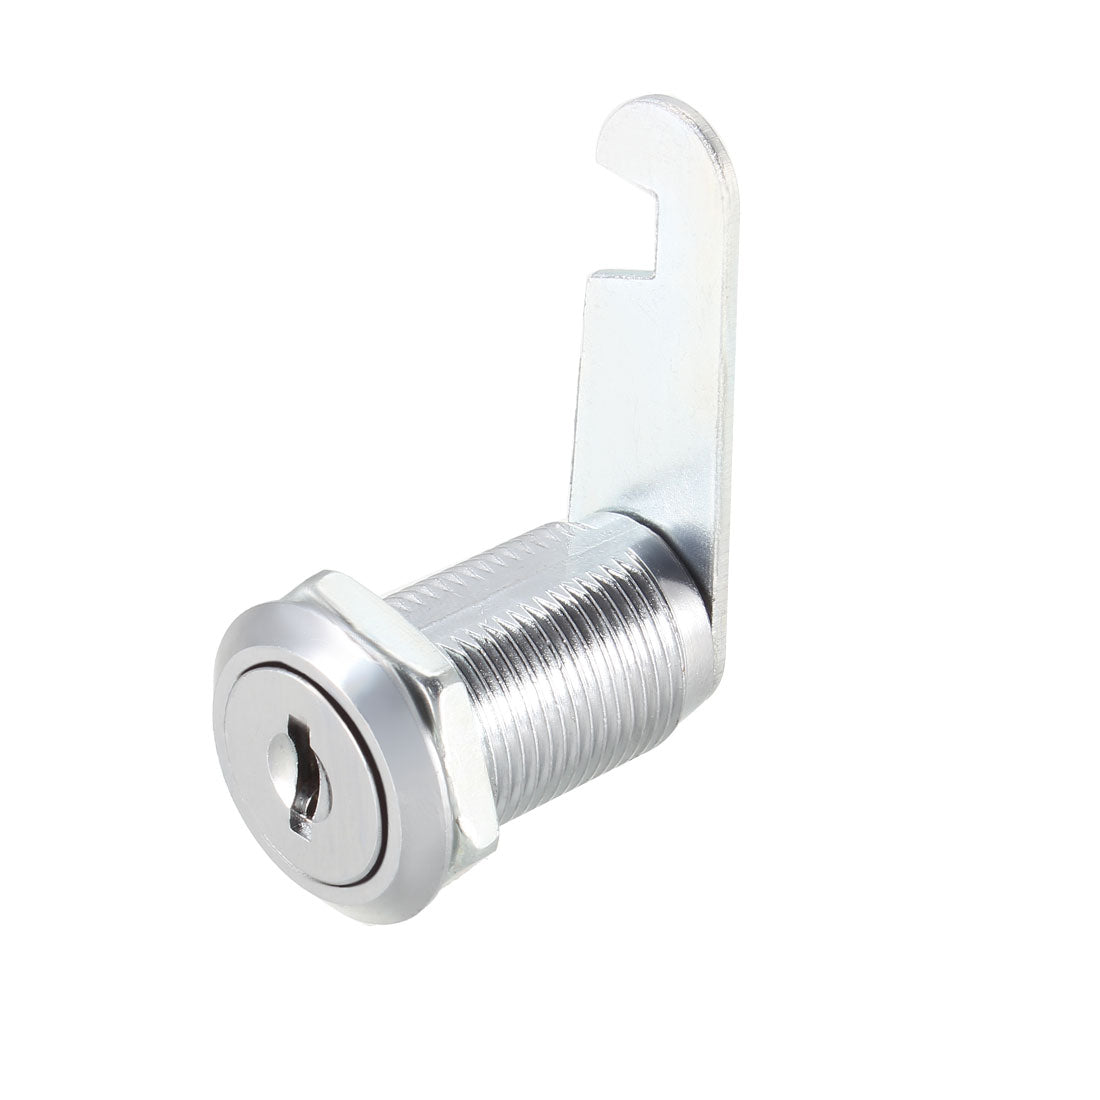 uxcell Uxcell Cam Locks 30mm Cylinder Length Fit Up to 7/8-inch Thick Panel Keyed Alike 4Pcs